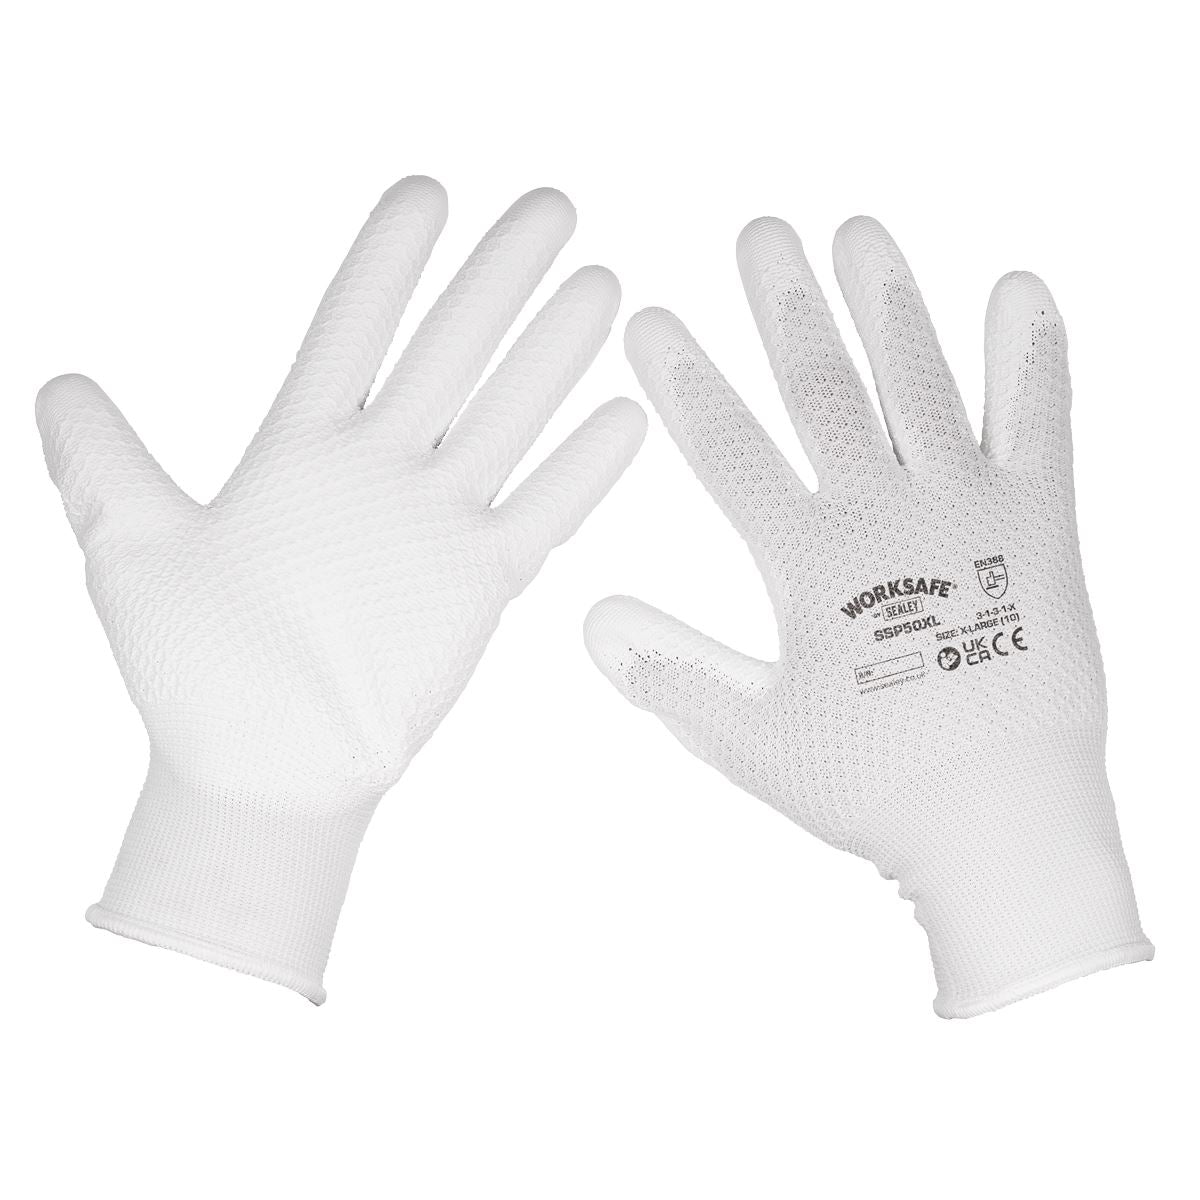 Worksafe by Sealey White Precision Grip Gloves X-Large- Pair